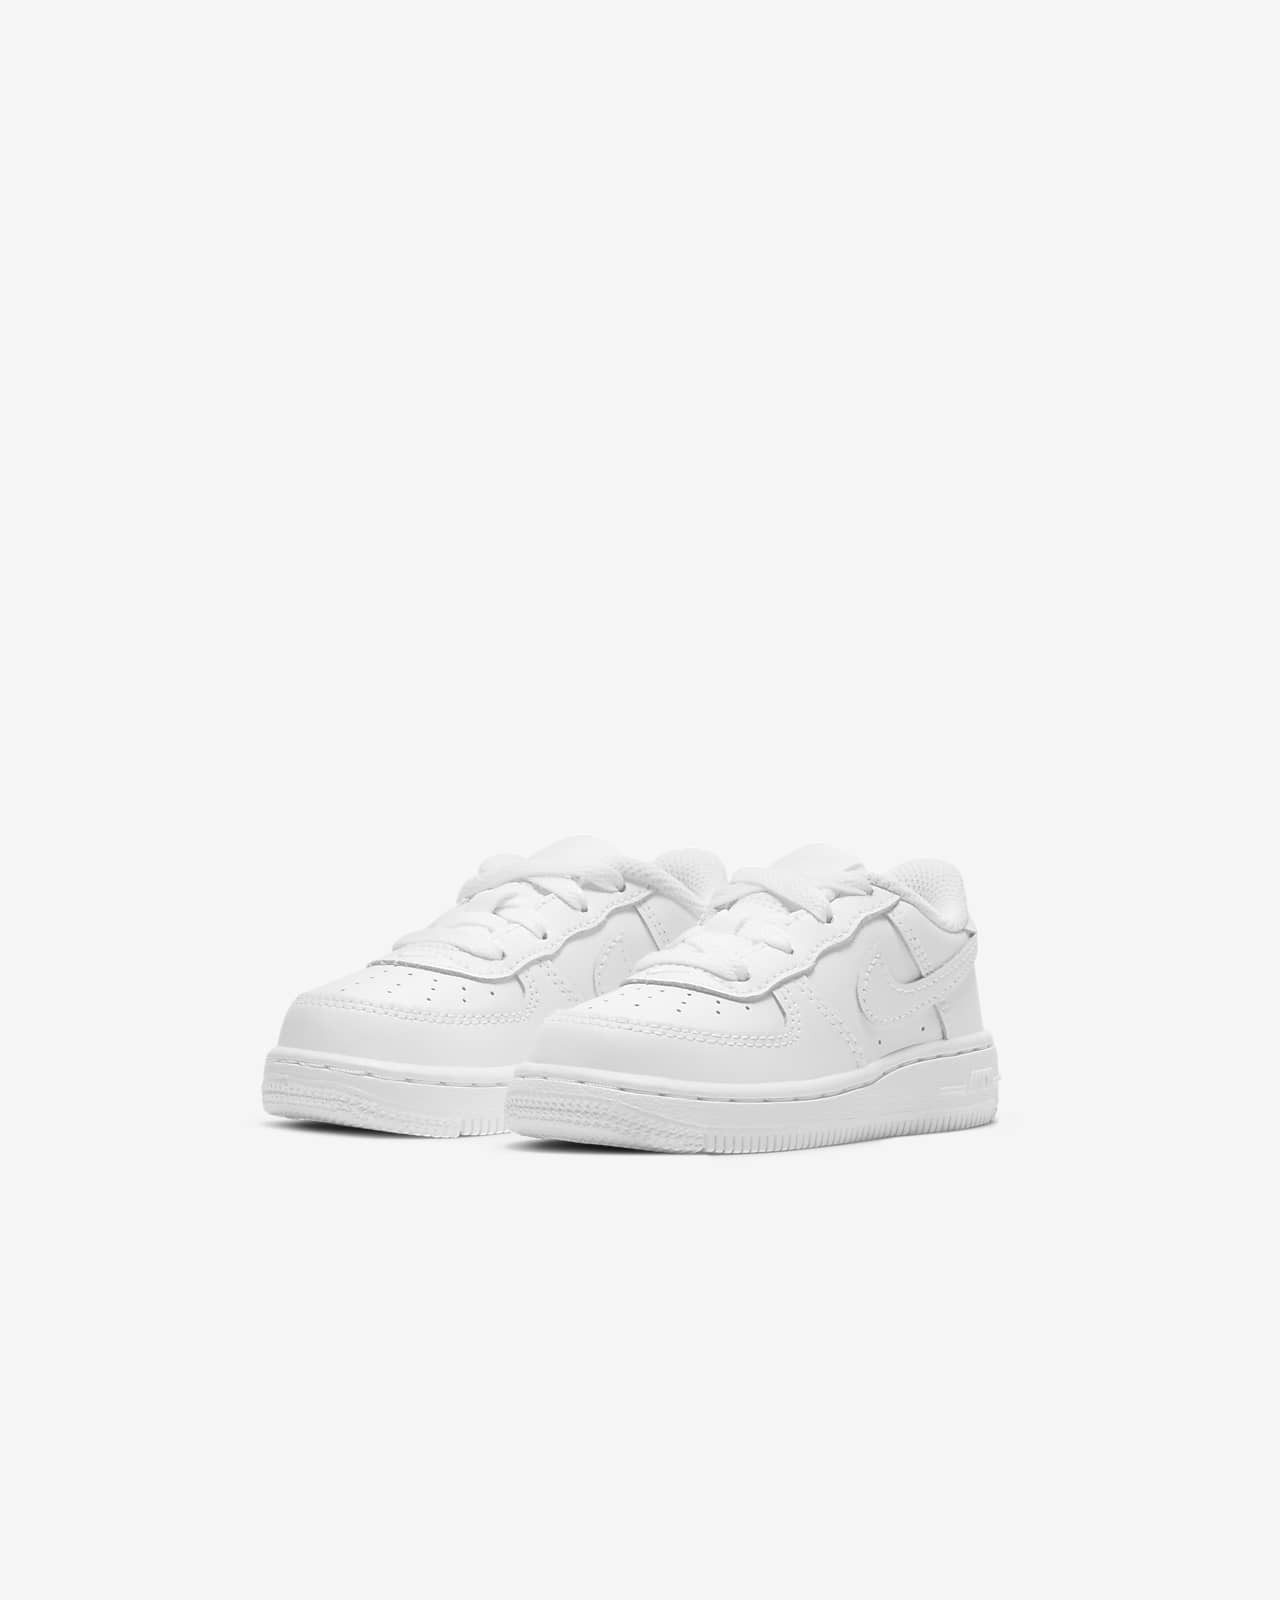 Nike Force 1 LV8 Baby/Toddler Shoes